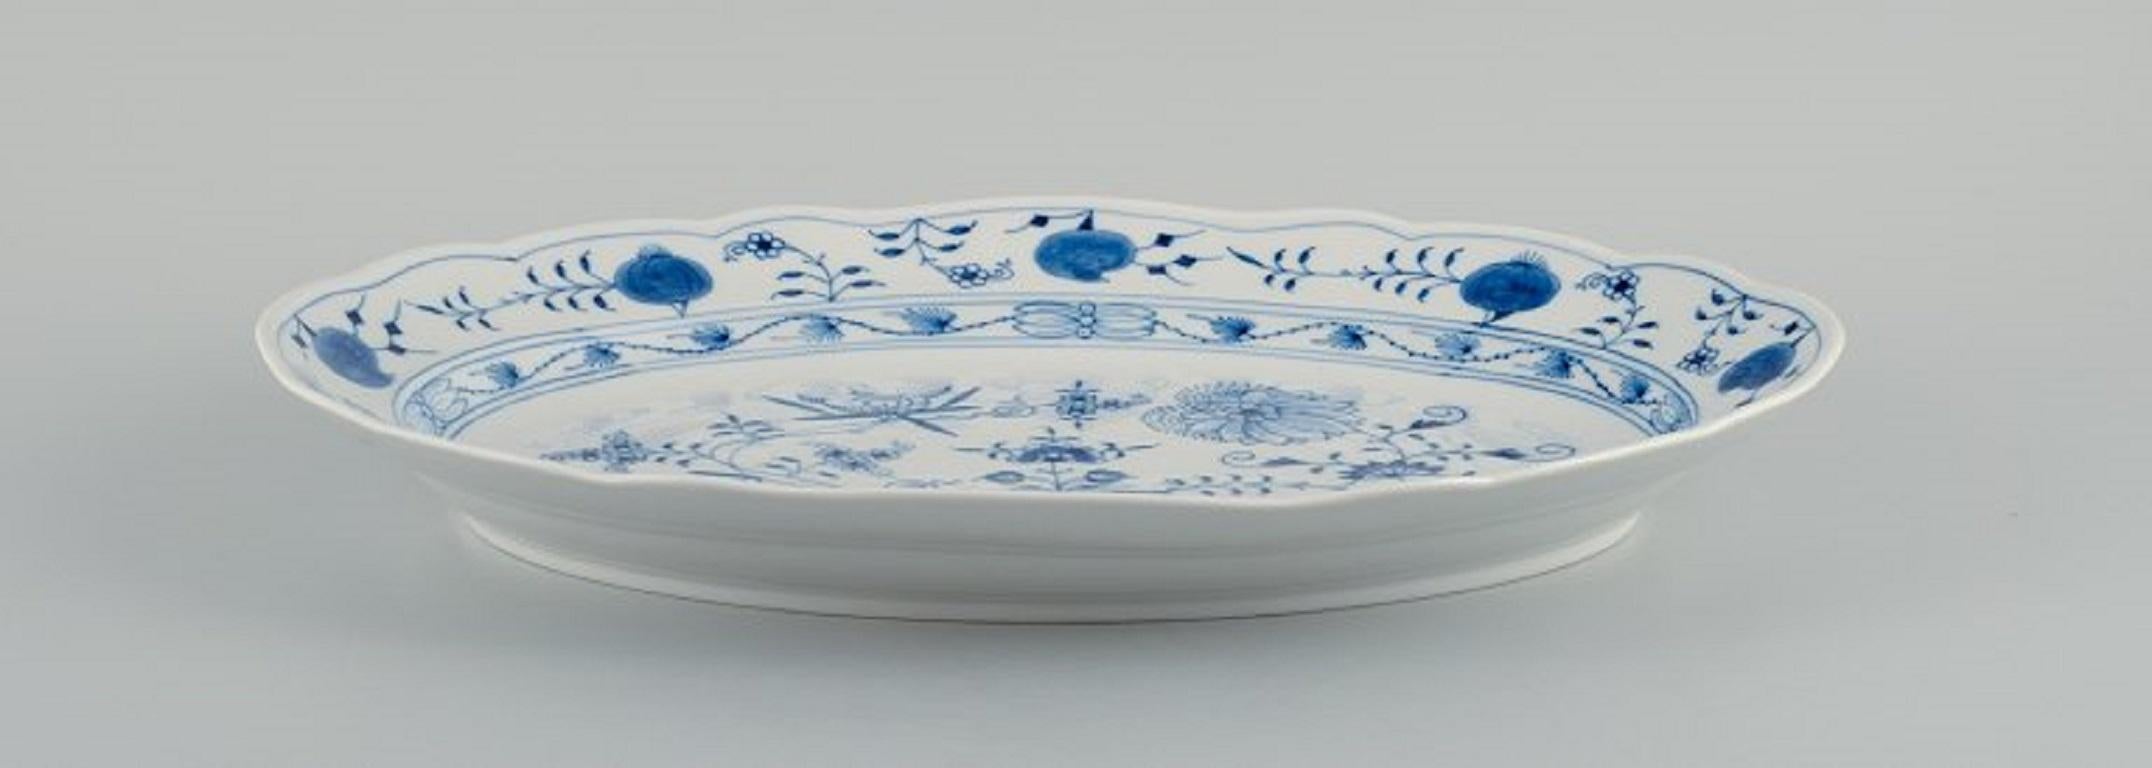 Meissen, blue onion oval dish in porcelain.
circa 1900.
Fourth factory quality.
Perfect condition.
Marked.
Dimensions: L 41.5 x D 30.5 x H 6.0 cm.